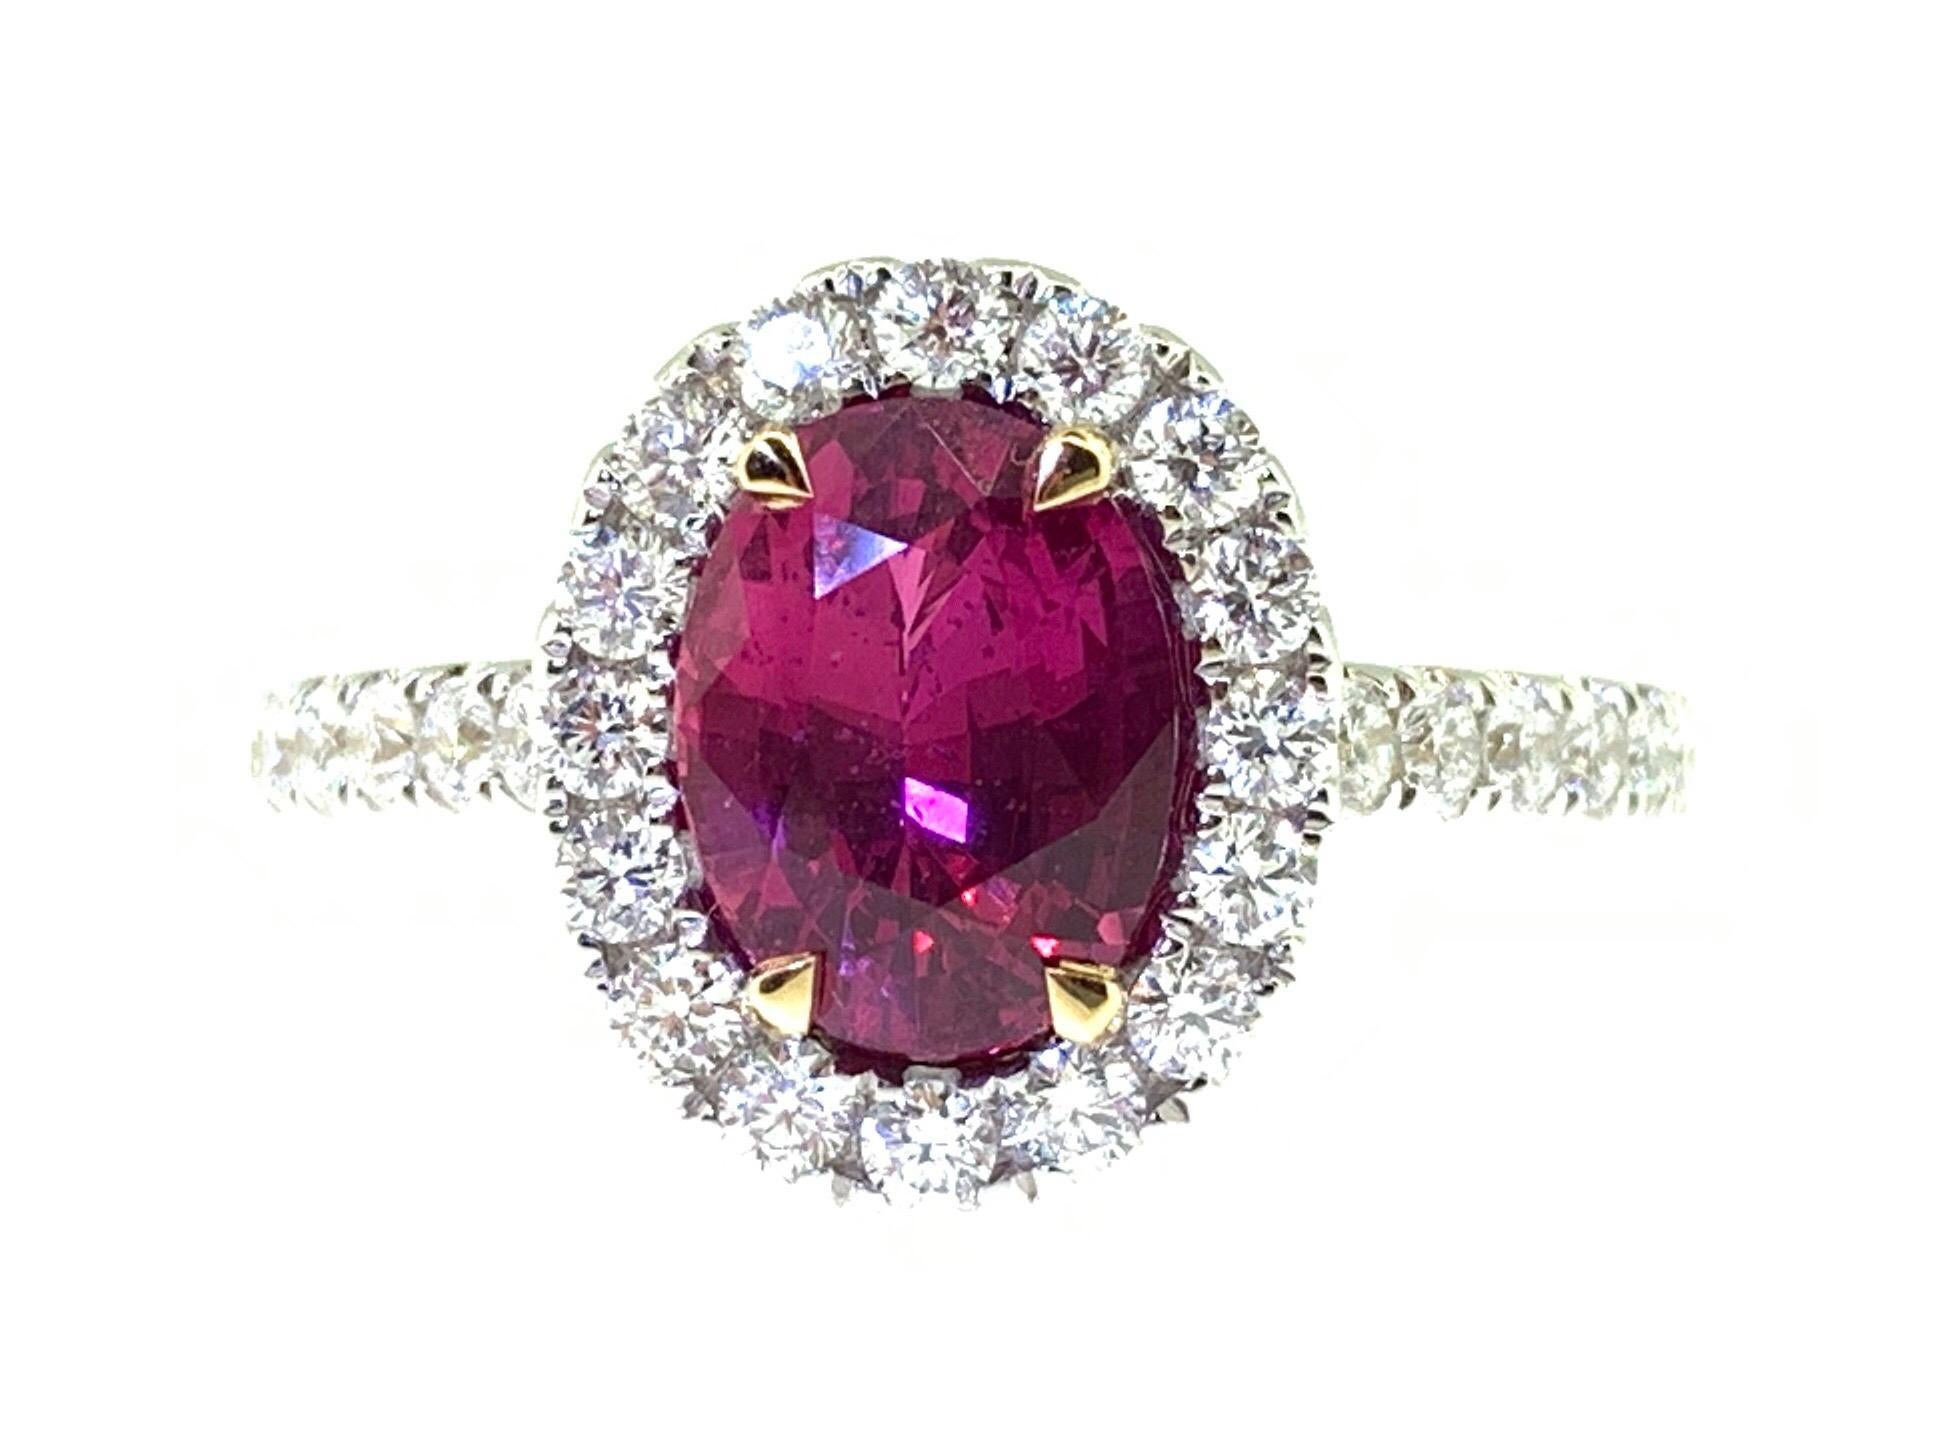 This stunning cocktail ring features a beautiful GIA Certified 2.09 Carat Oval Ruby with a Diamond Halo on a Diamond Shank. This ring is set in 18k white gold, with 18k yellow gold prongs on the center stone. 
Total diamond weight = 0.59 carats.